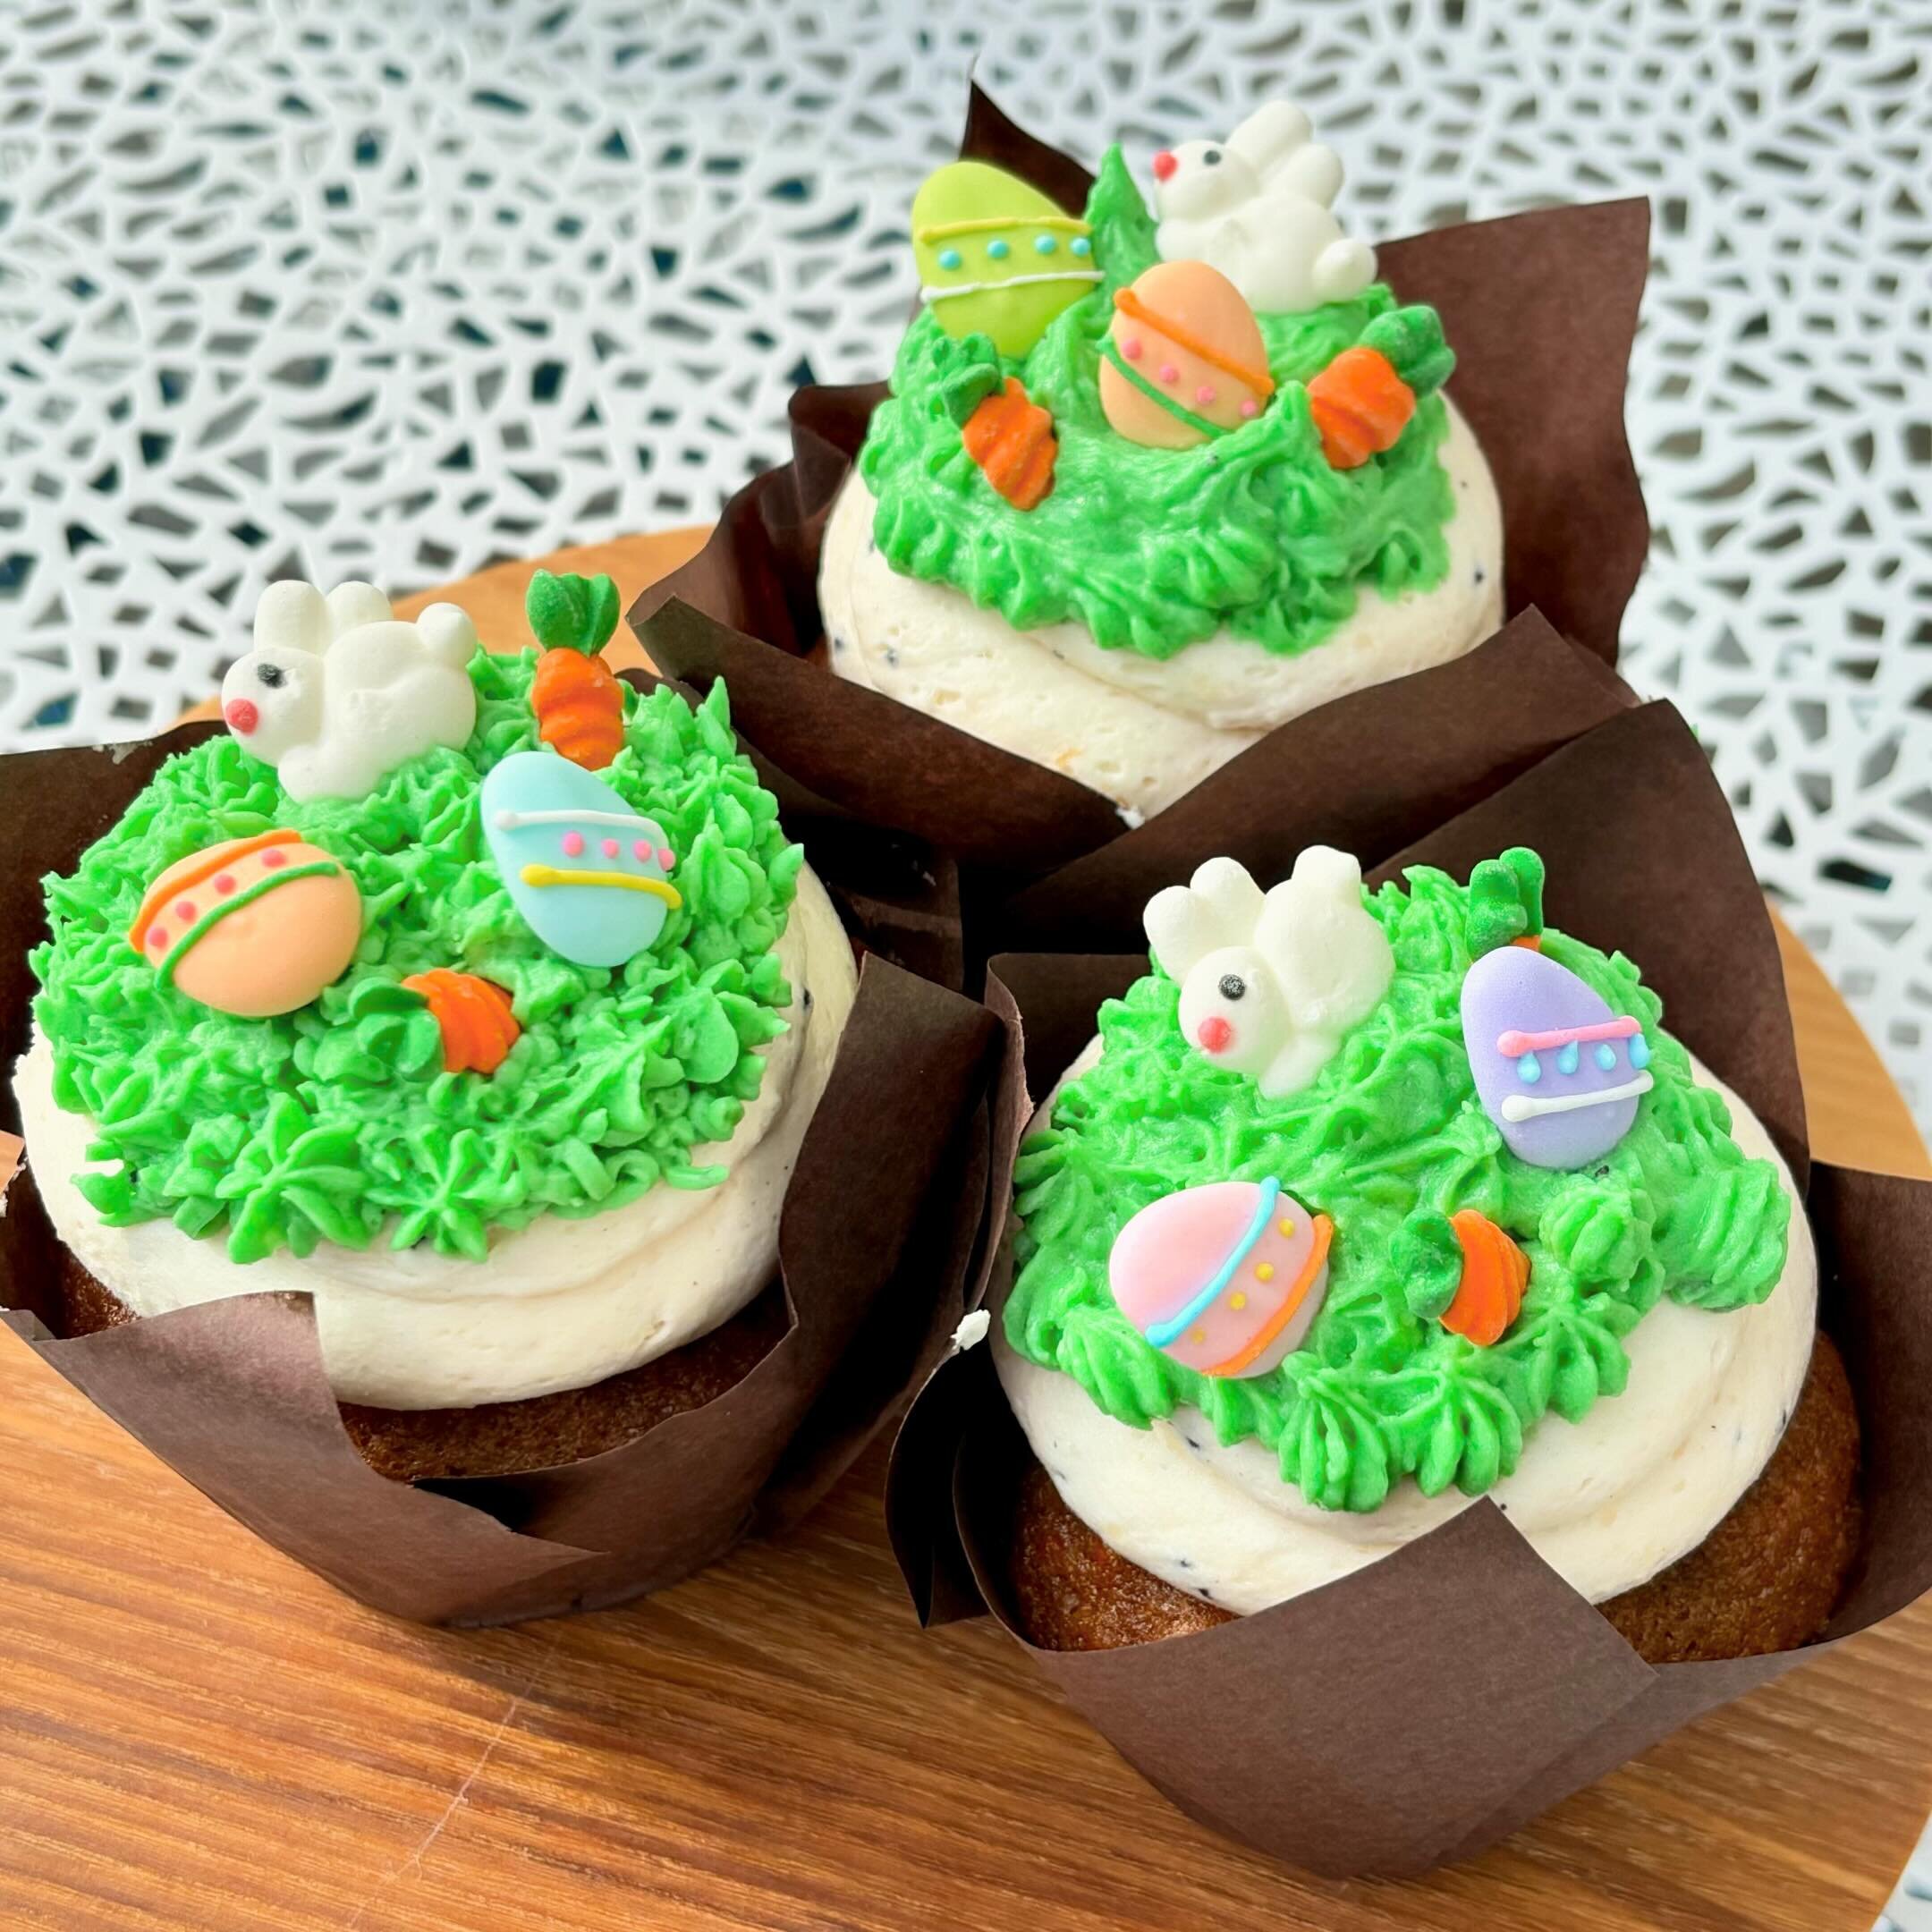 Easter cupcakes are here! Available beginning today! 🐣 🌷🥕 Carrot cake cupcakes topped with brown butter cream cheese frosting!

#easter #eastercupcakes #easterpittsburgh #shadysideeats #pittsburghfoodie #pghbakery #pittsburghcoffee #supportlocal #